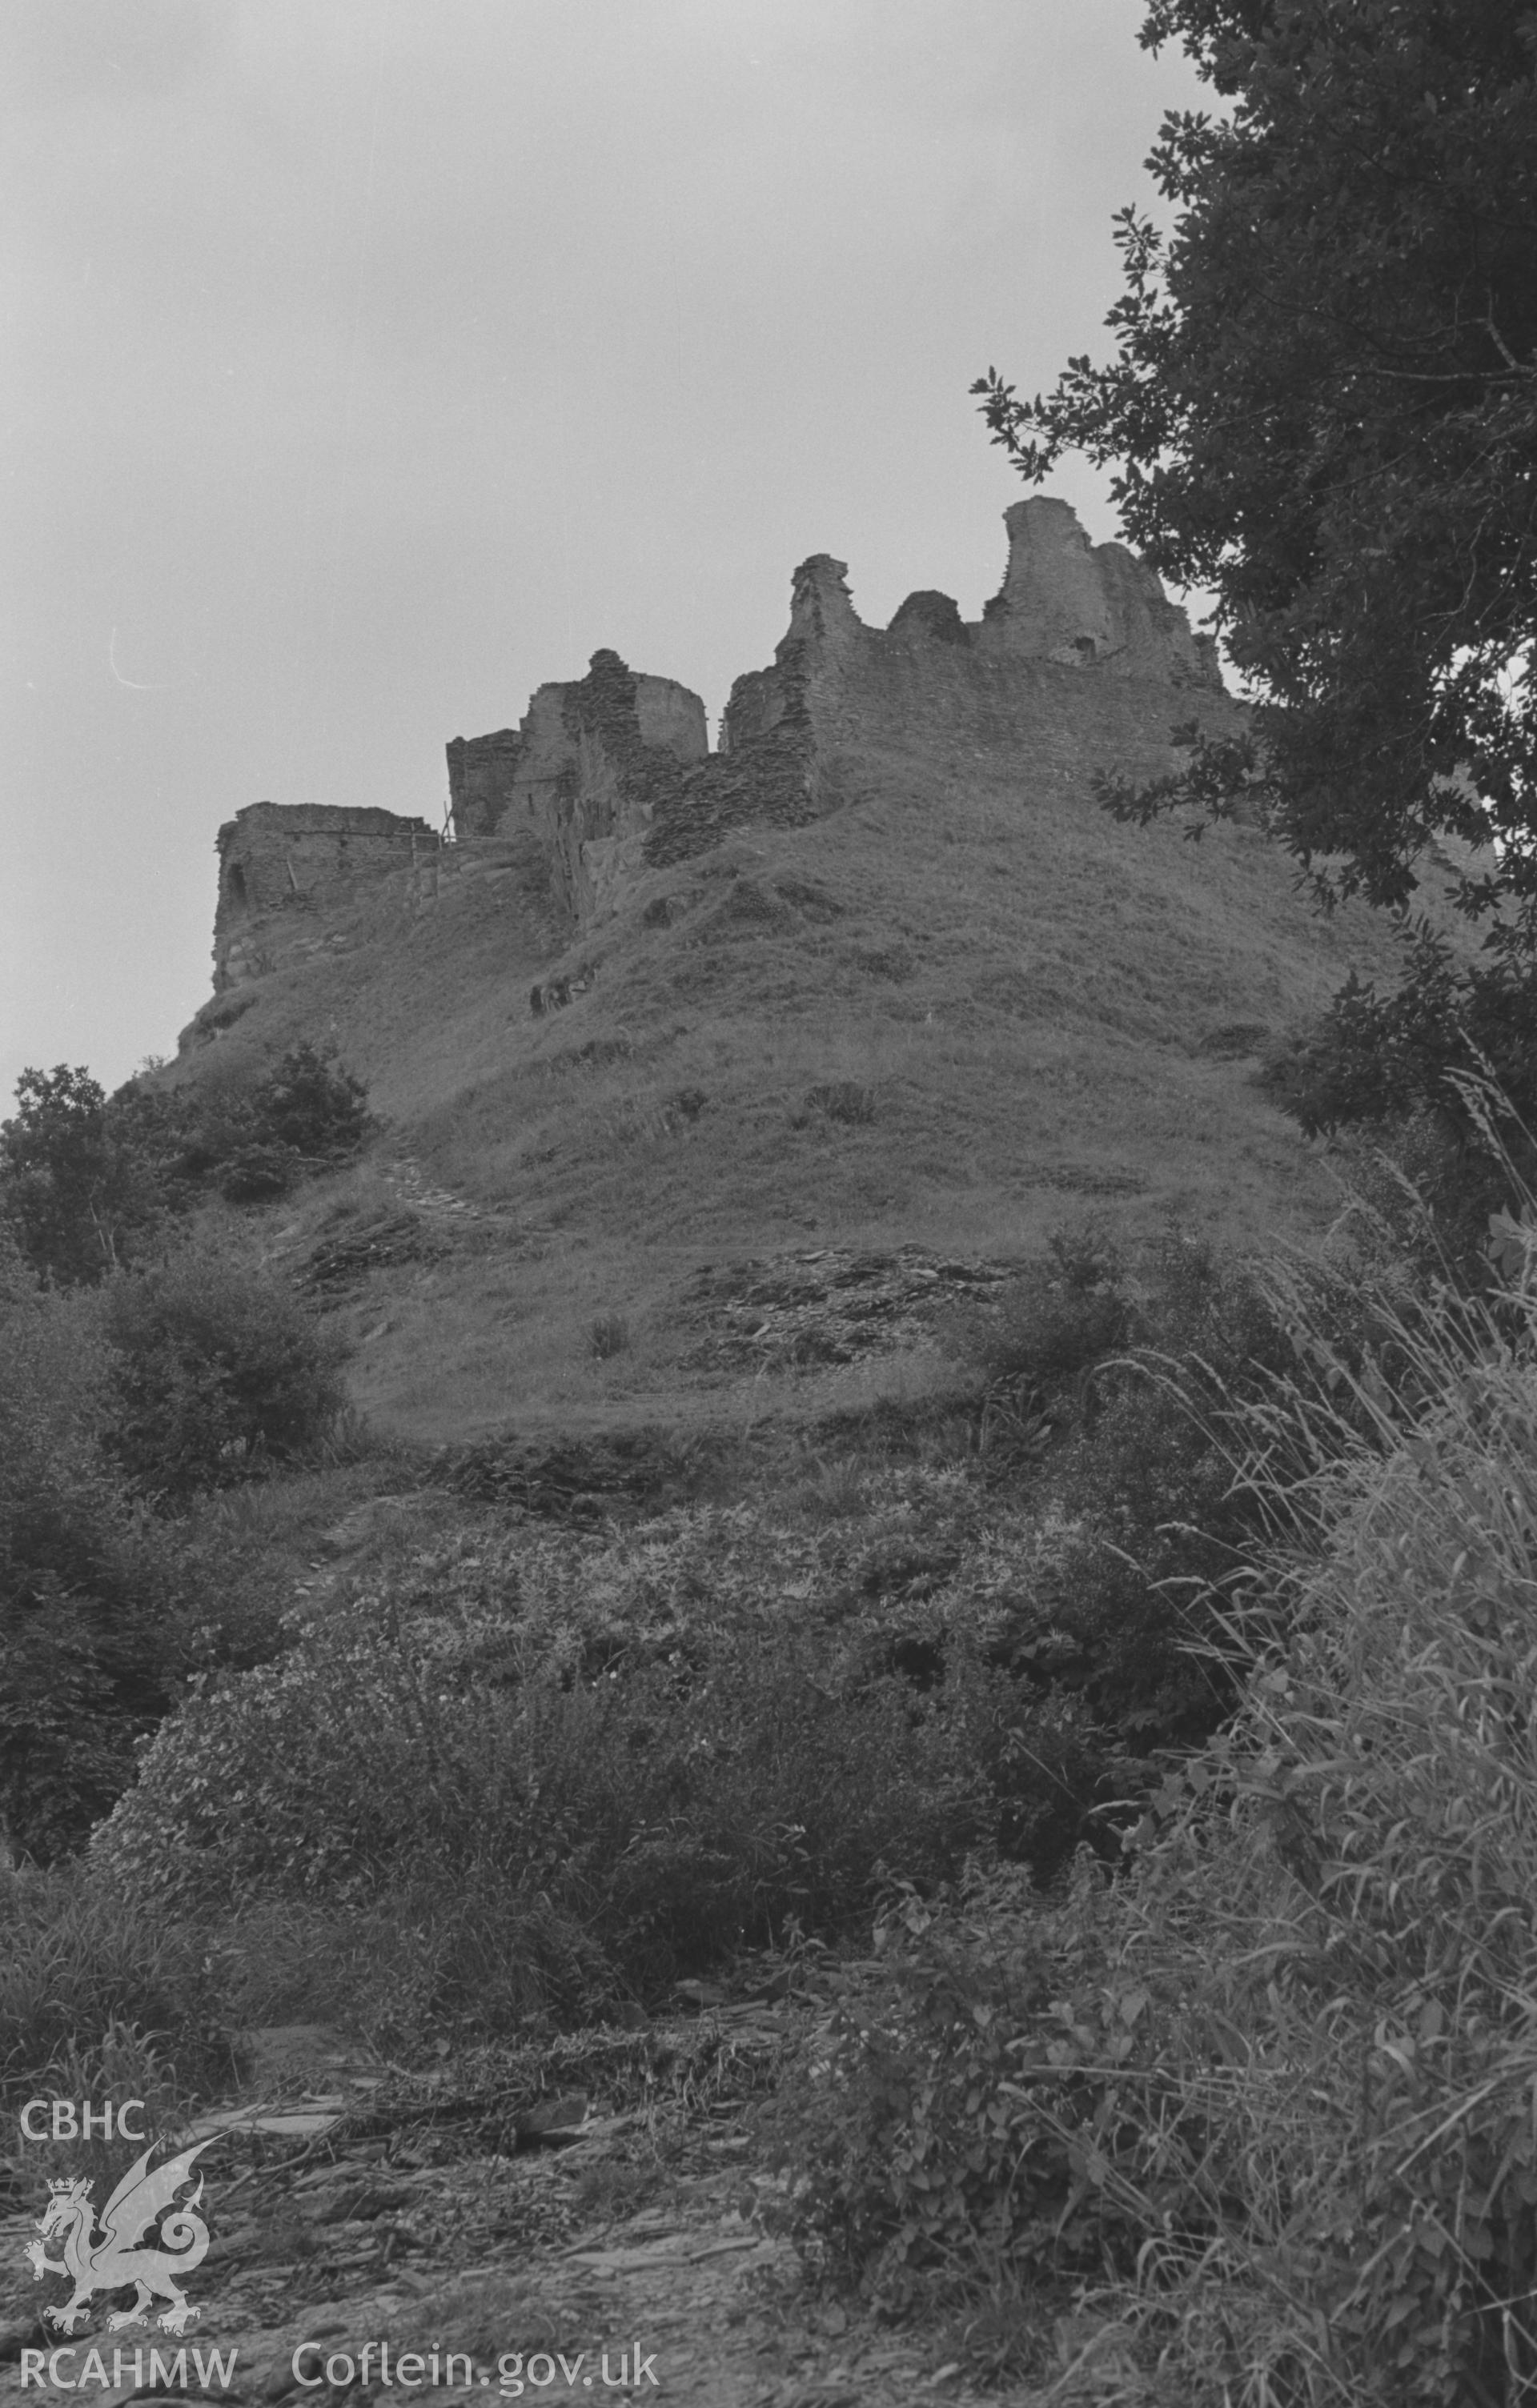 Digital copy of a black and white negative showing Coedmore woods, the Teifi, and Cilgerran castle. Photographed in September 1963 by Arthur O. Chater from Grid Reference SN 1947 4324, looking south south east - east. Panorama, photo 1 of 4 (duplicate).